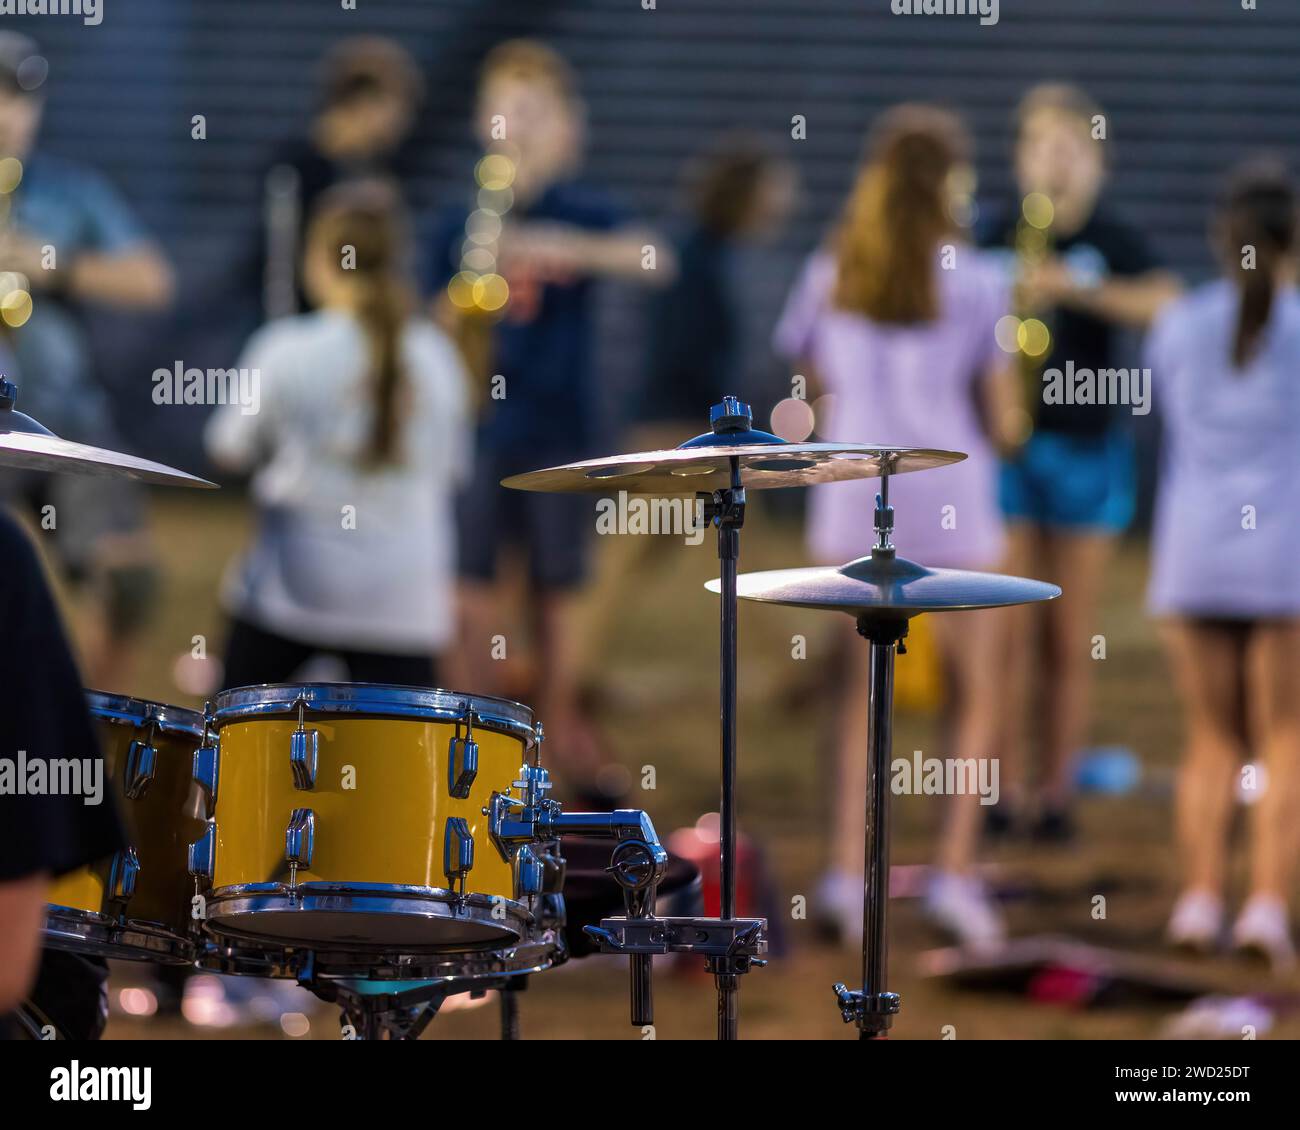 modified drum kit set up outside as part of a marching bands sideline percussion Stock Photo